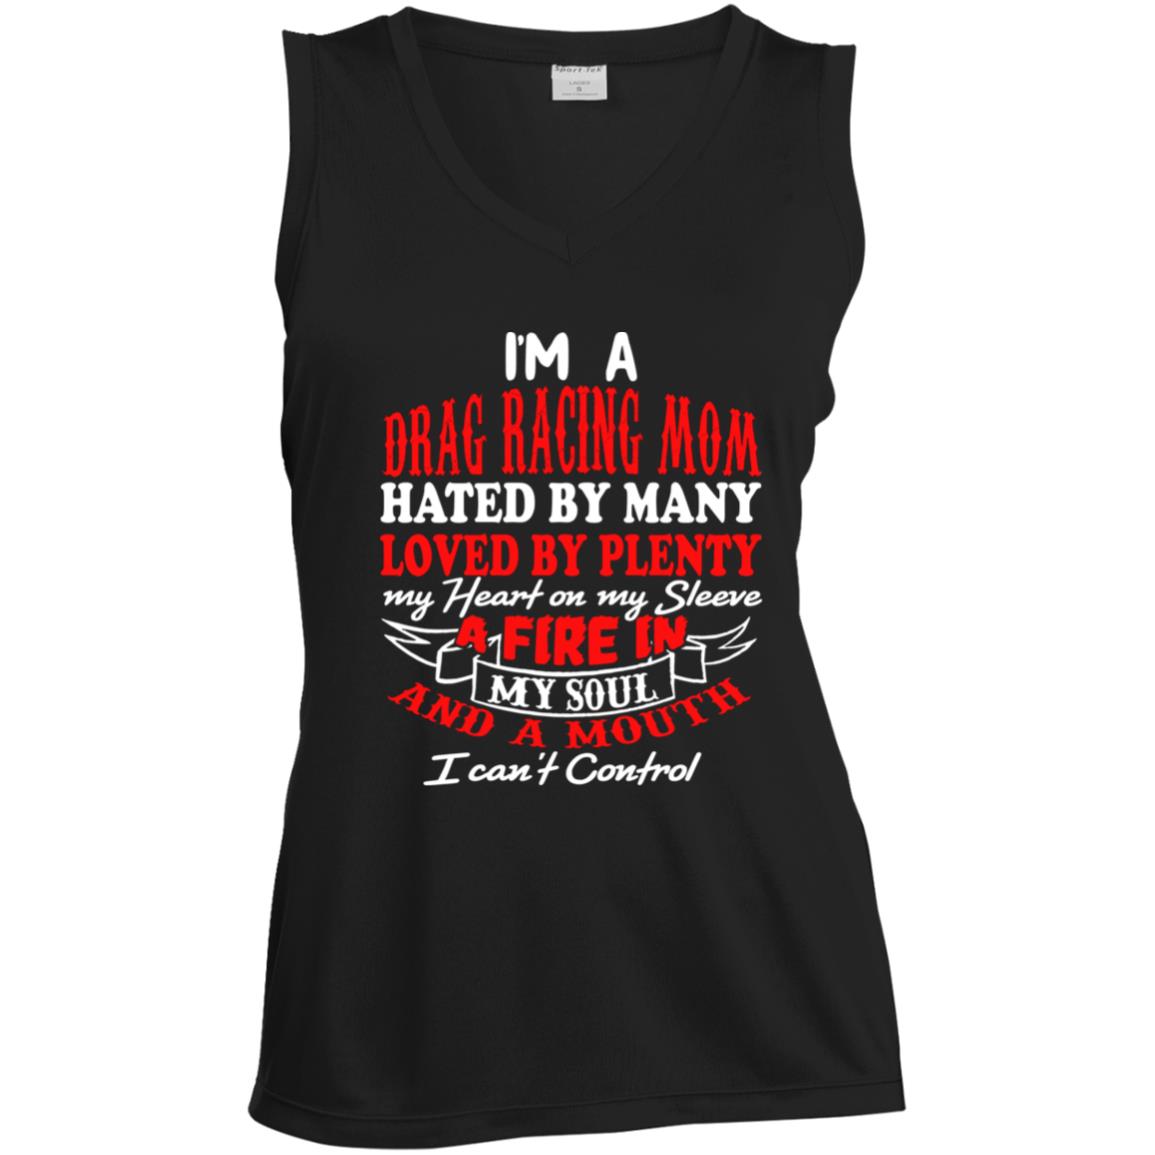 I'm A Drag Racing Mom Hated By Many Loved By Plenty Ladies' Sleeveless V-Neck Performance Tee